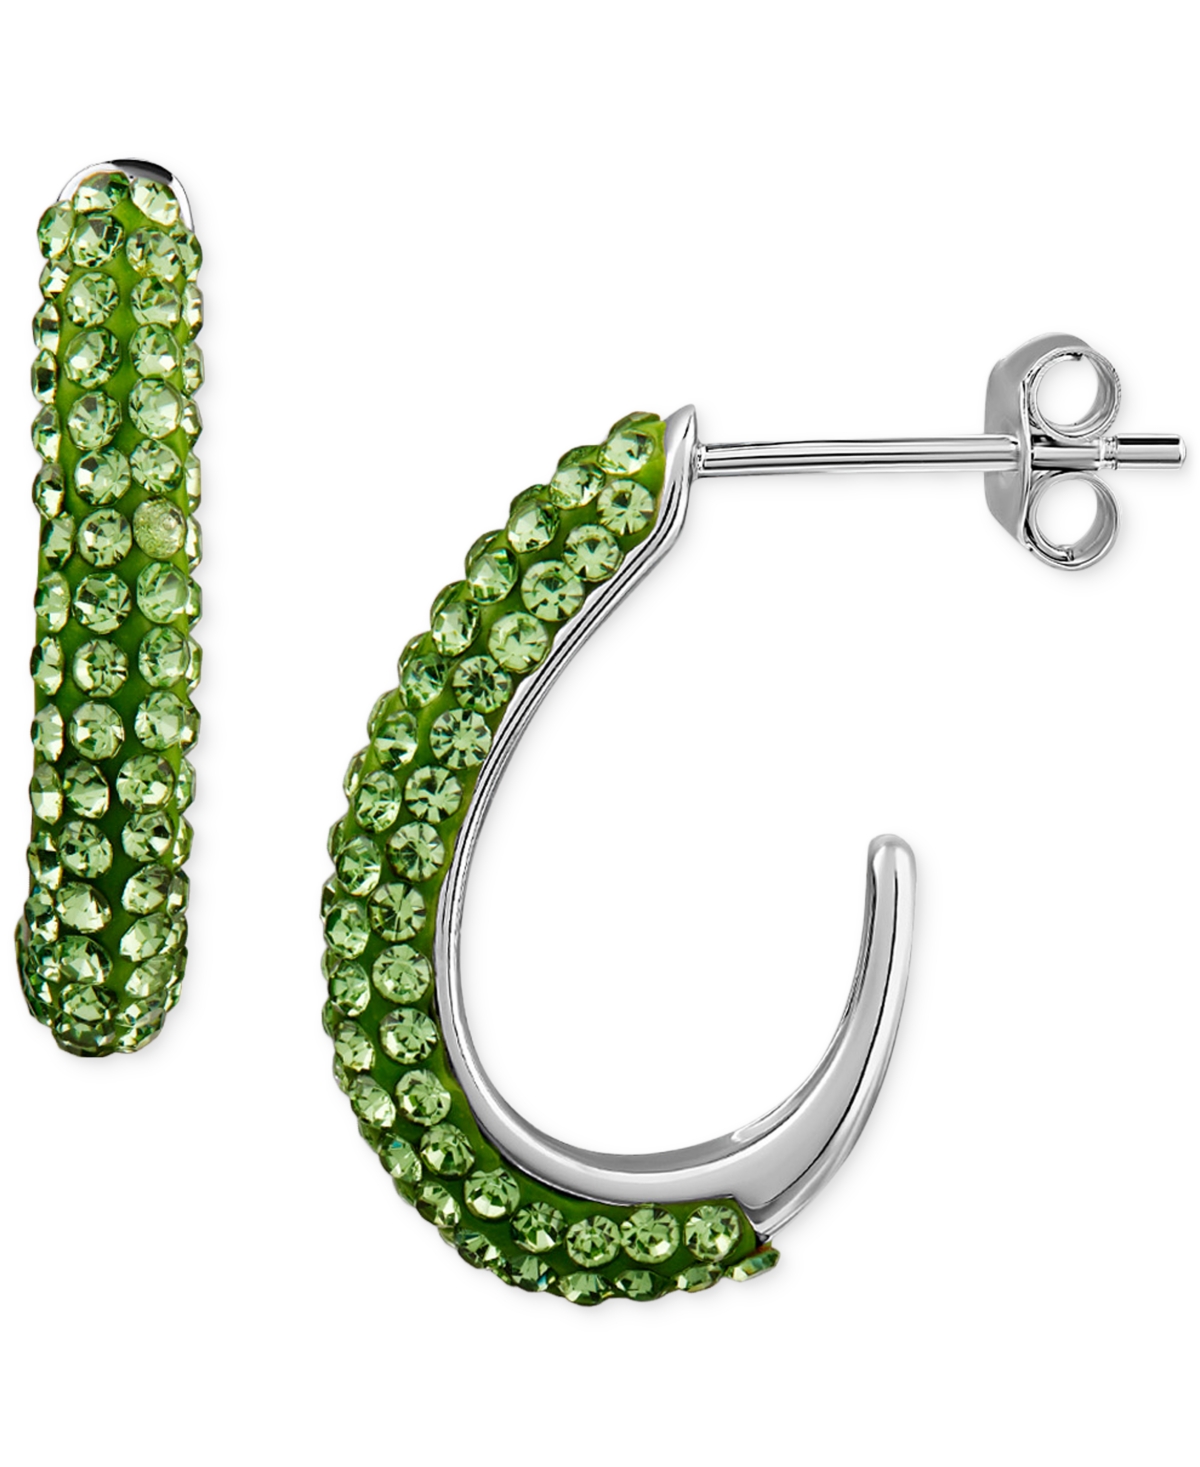 Giani Bernini Lavender Crystal Pave J-hoop Earrings In Sterling Silver, Created For Macy's In Green